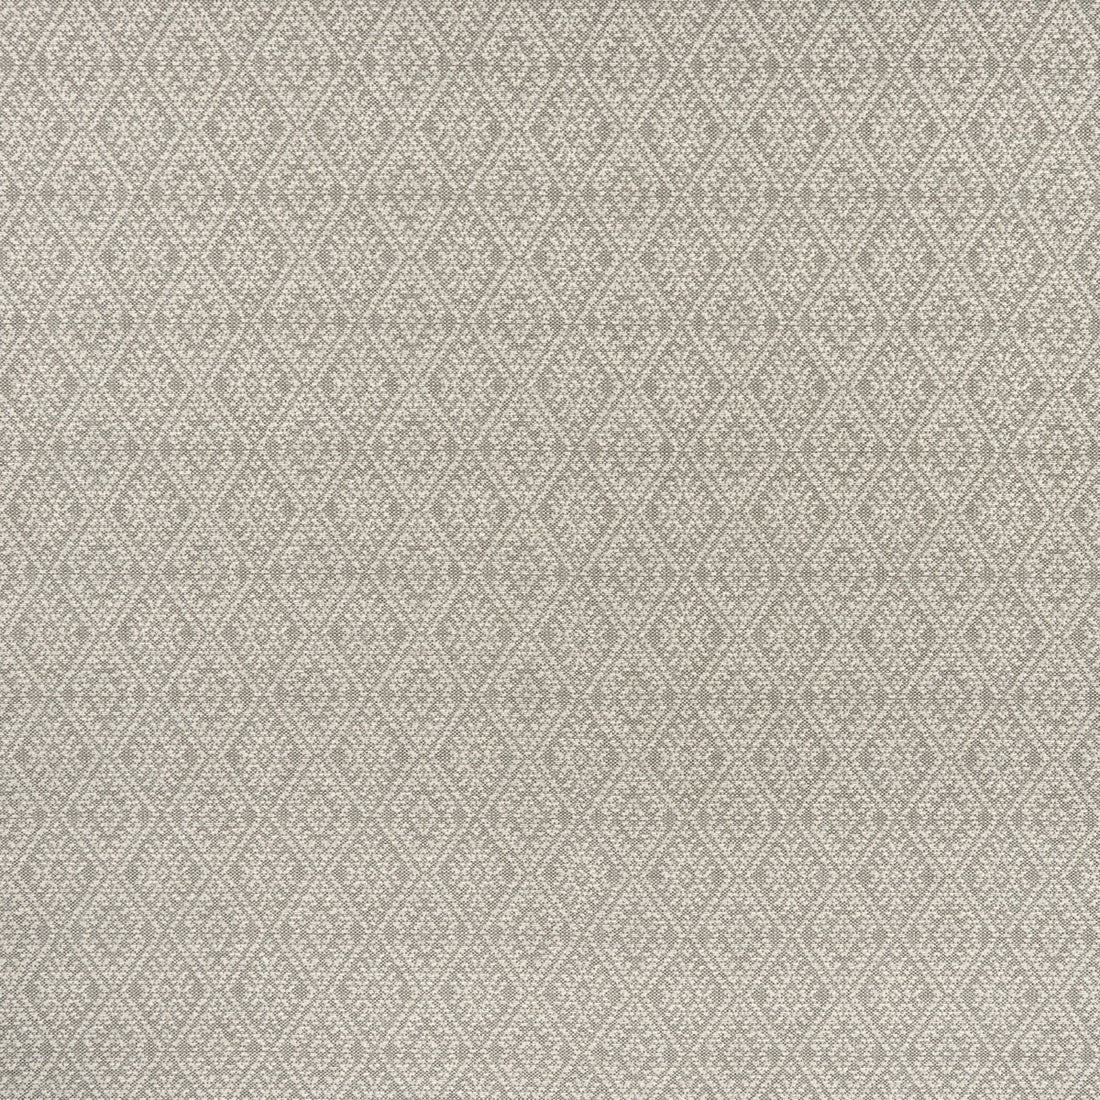 Hampstead fabric in charcoal color - pattern F1005/02.CAC.0 - by Clarke And Clarke in the Clarke &amp; Clarke Halcyon collection